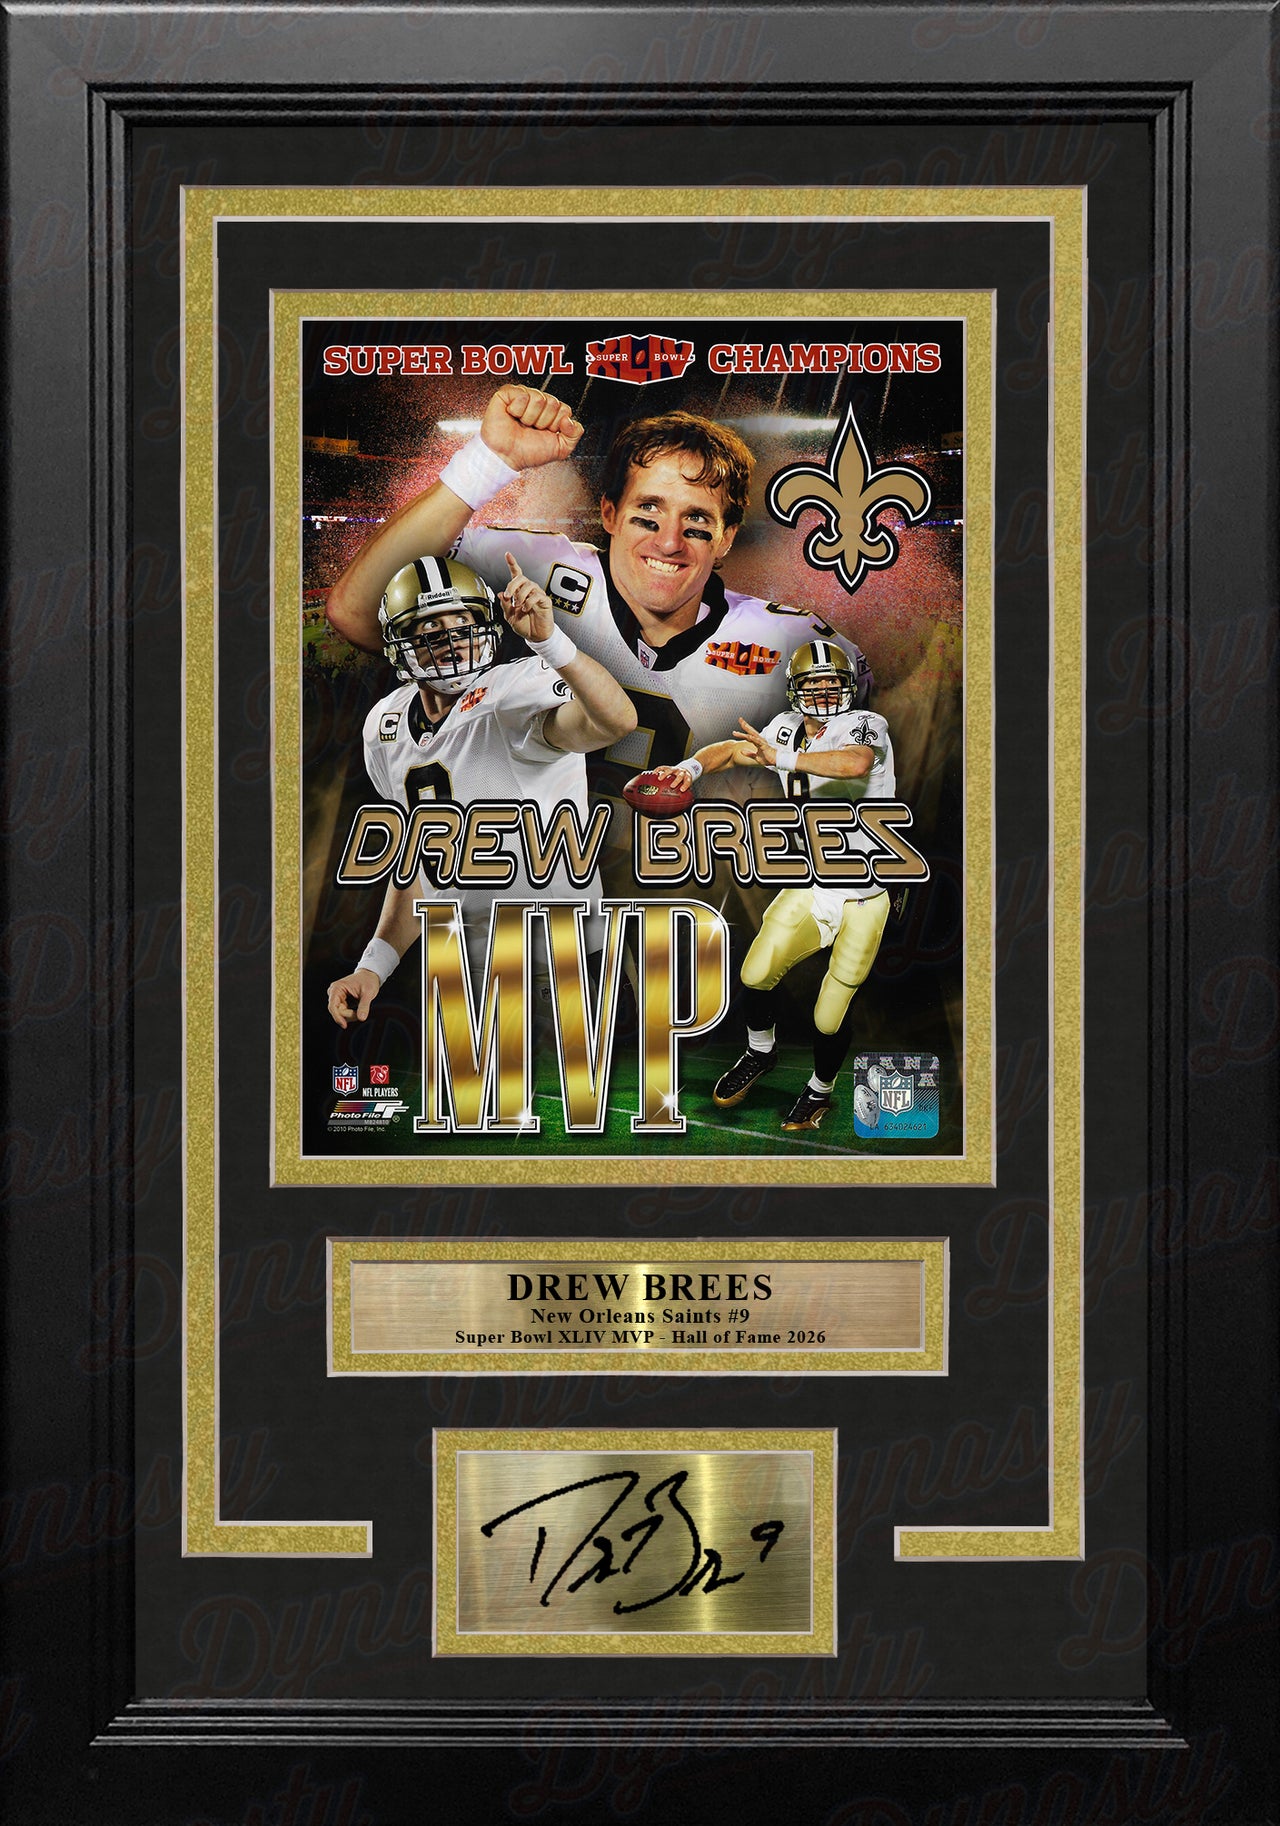 Drew Brees Super Bowl MVP New Orleans Saints 8" x 10" Framed Football Photo with Engraved Autograph - Dynasty Sports & Framing 